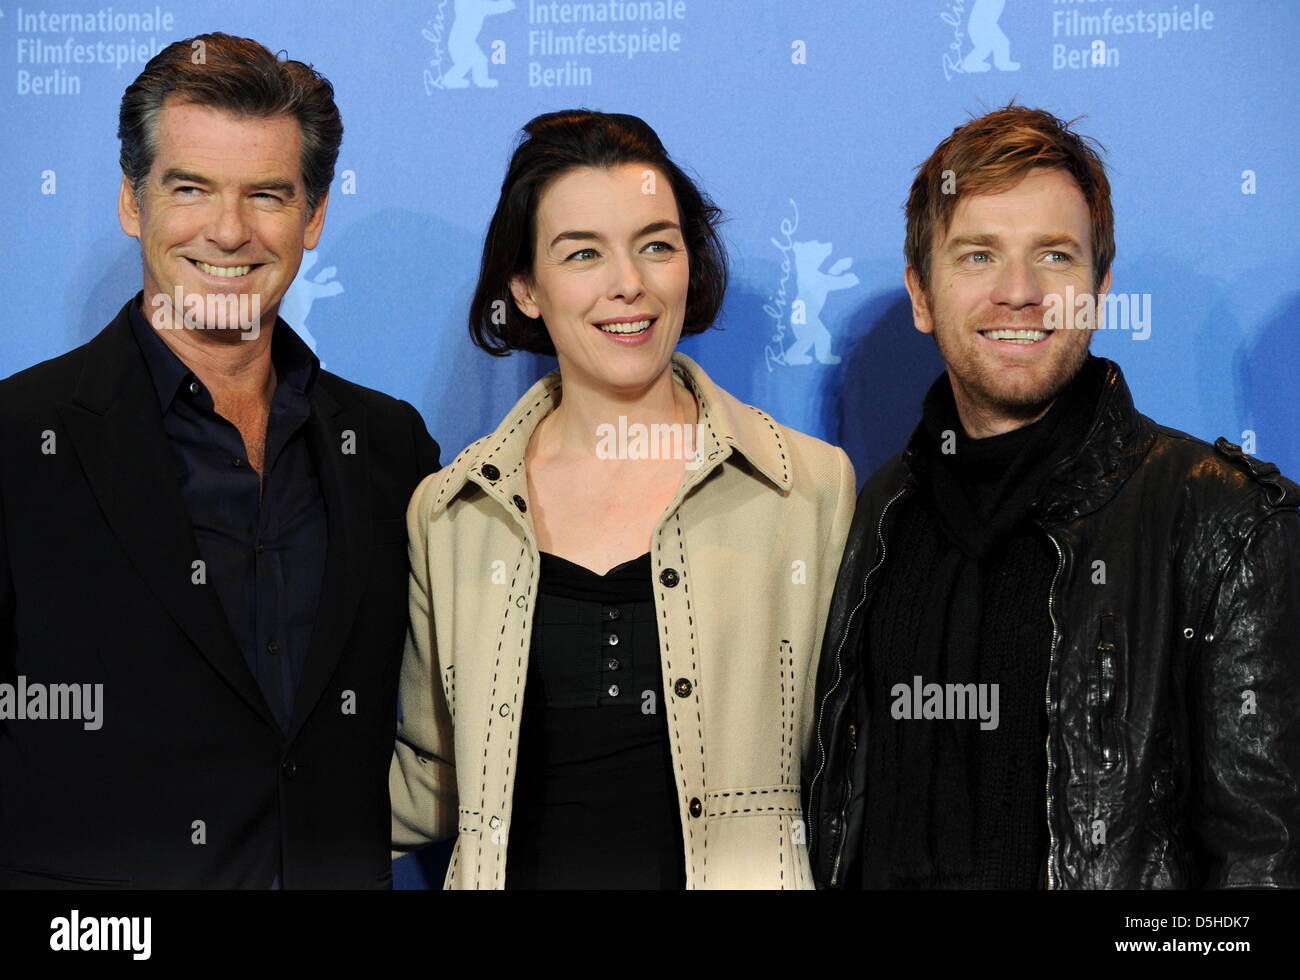 US actor Pierce Brosnan (L-R), British actress Olivia Williams and Scottish actor Ewan McGregor attend the photocall of the film 'The Ghost Writer' during the 60th Berlinale international film festival on Friday 12 February 2010 in Berlin. The festival runs until 21 Febuary 2010. Photo: Tim Brakemeier dpa/lbn Stock Photo